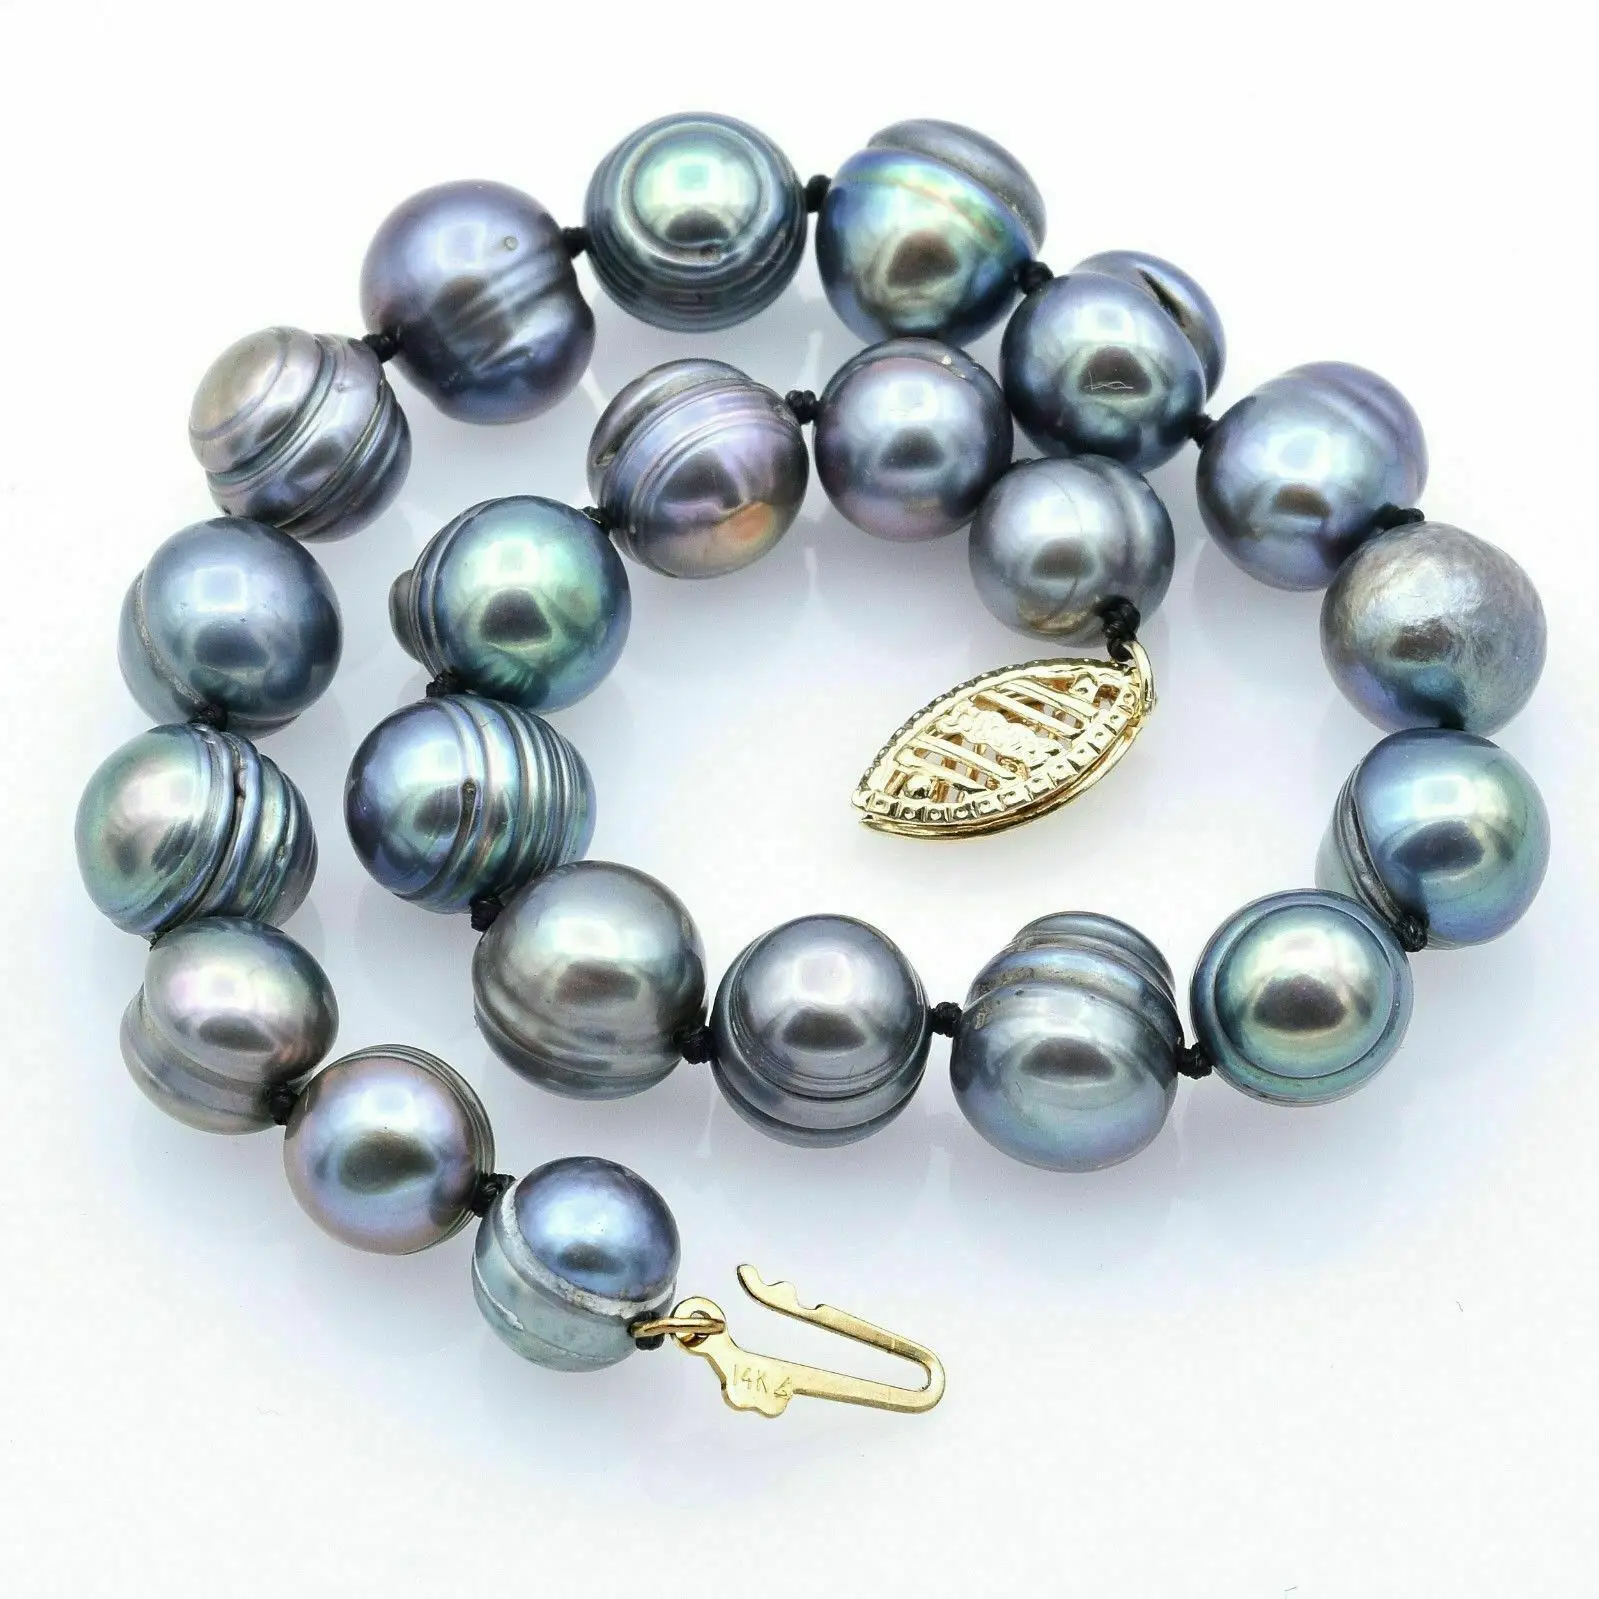 

Large AAA+ 11-12mm South China Sea Authentic Black Baroque Pearl Bracelet 7.5-8-inch 14K Gold